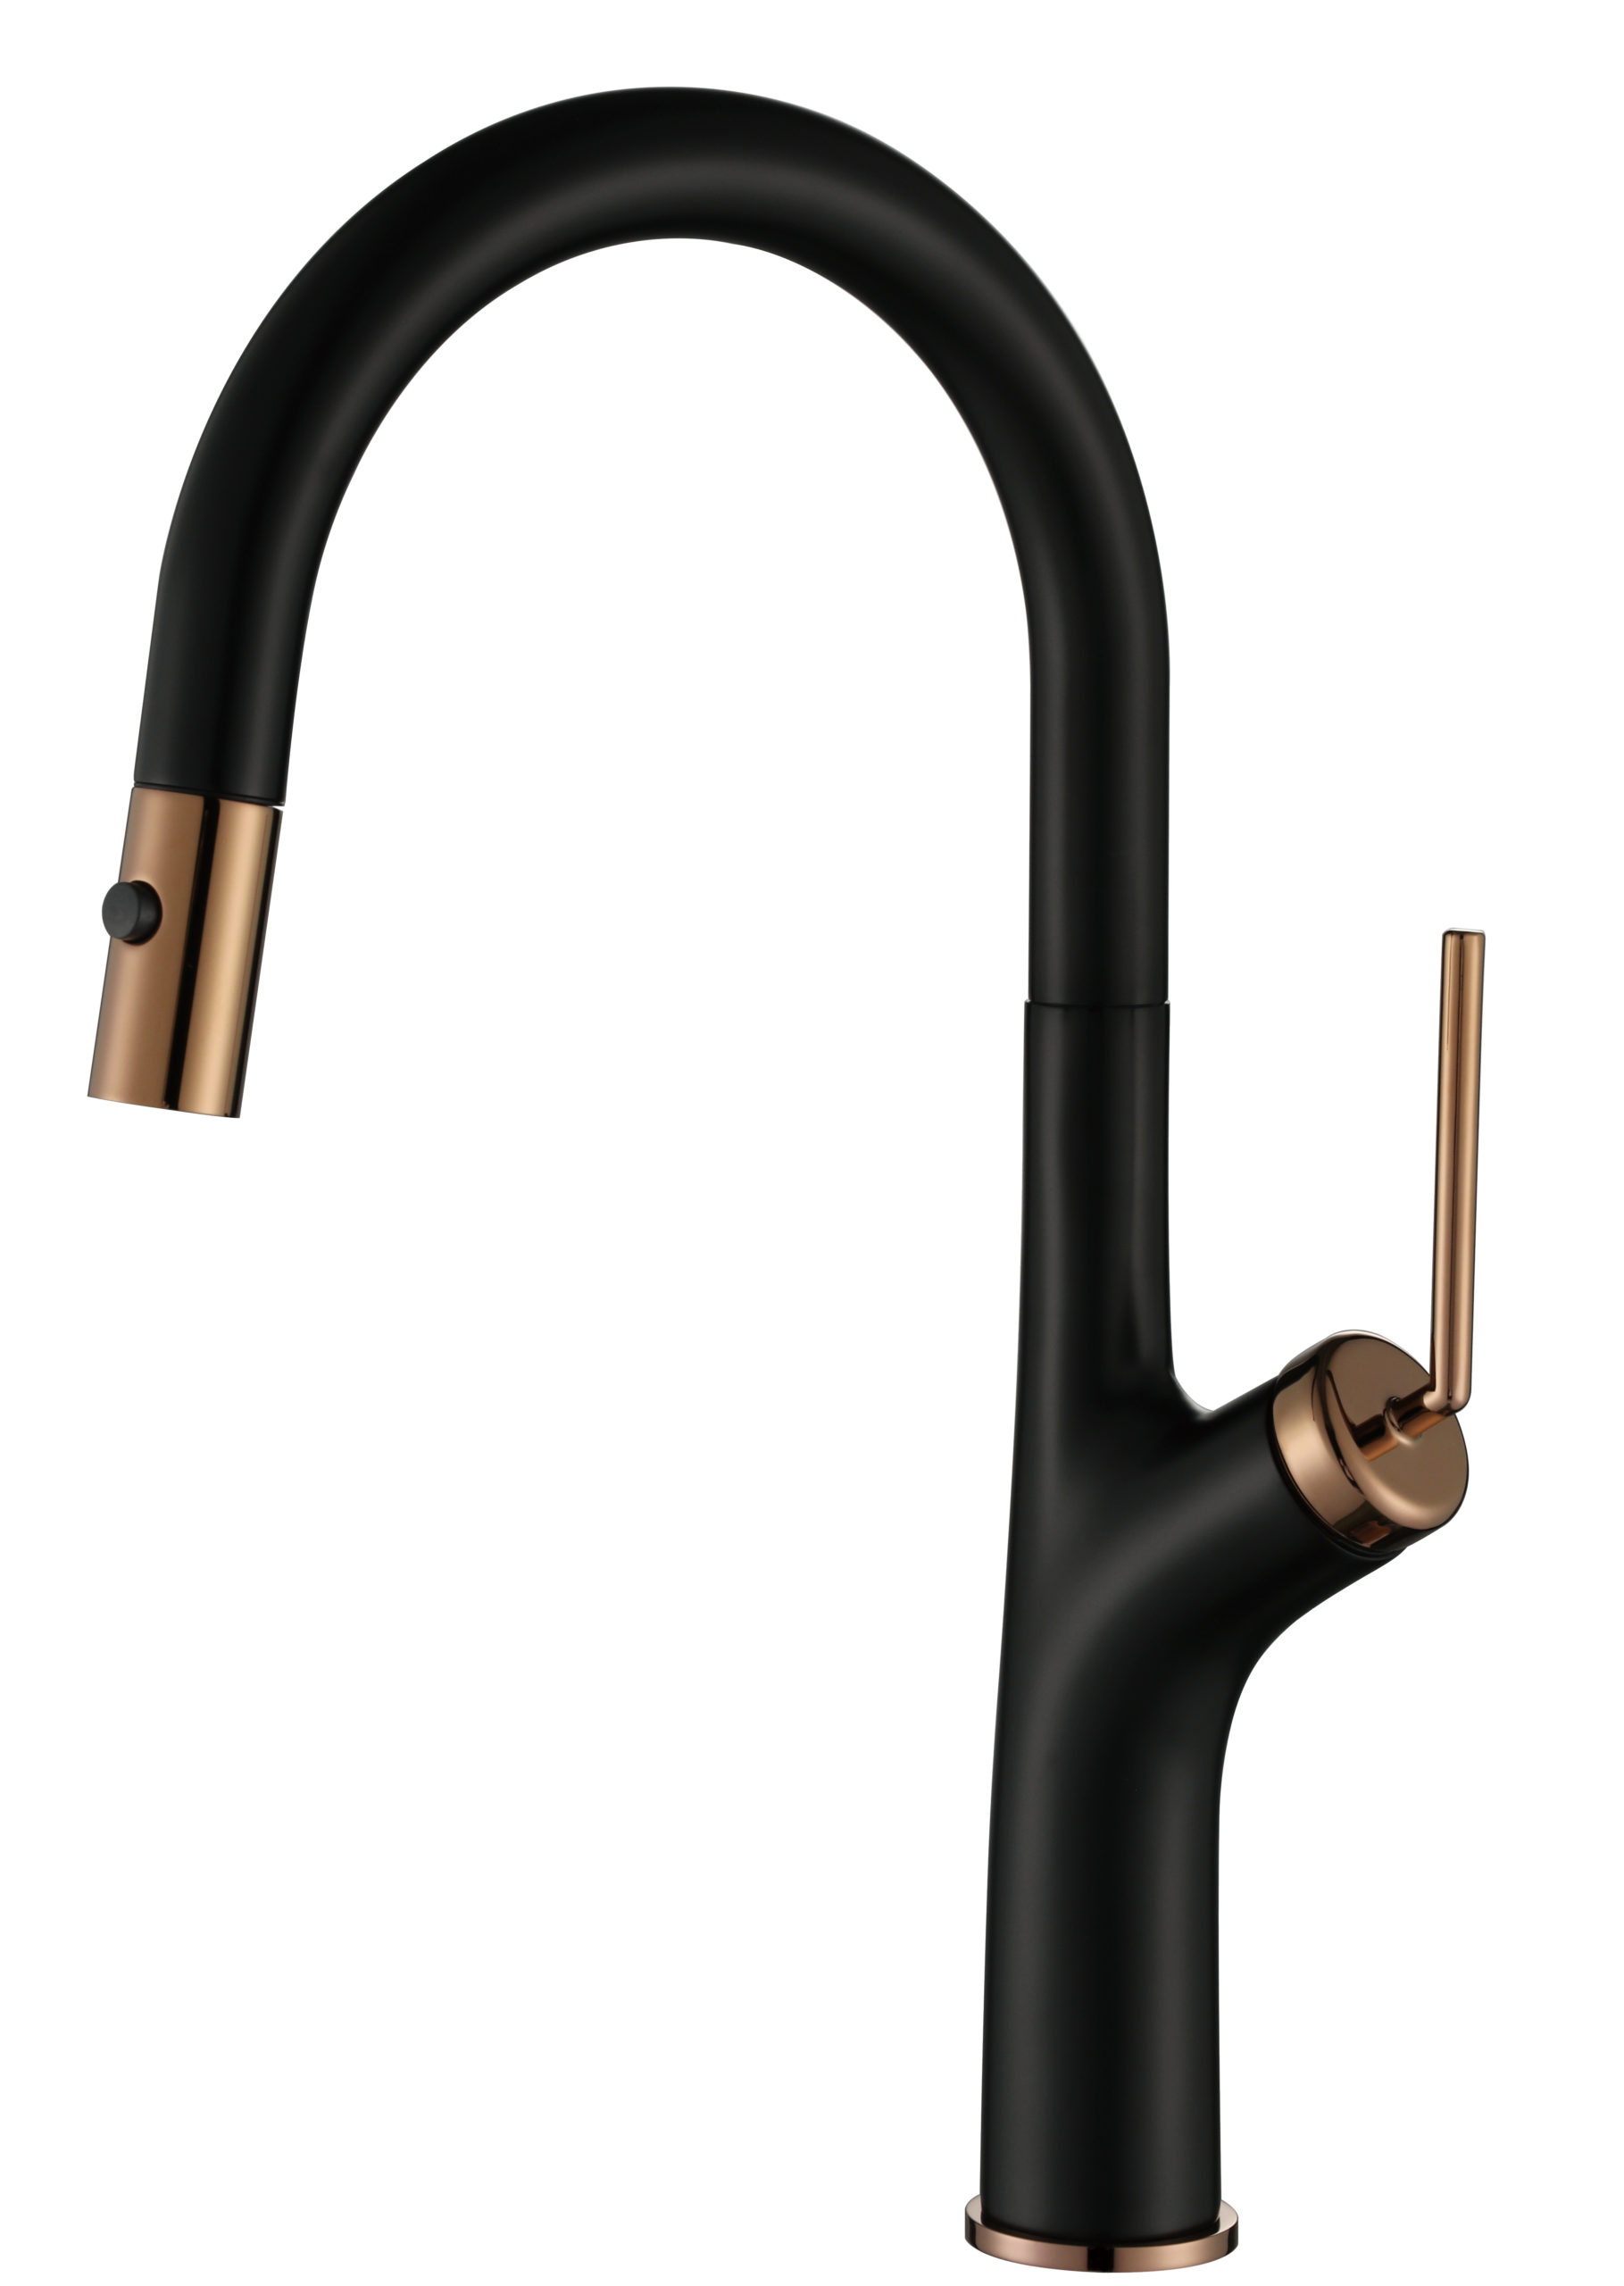 M59705B/RG Rose Gold/Black Pull-Out Kitchen Mixer